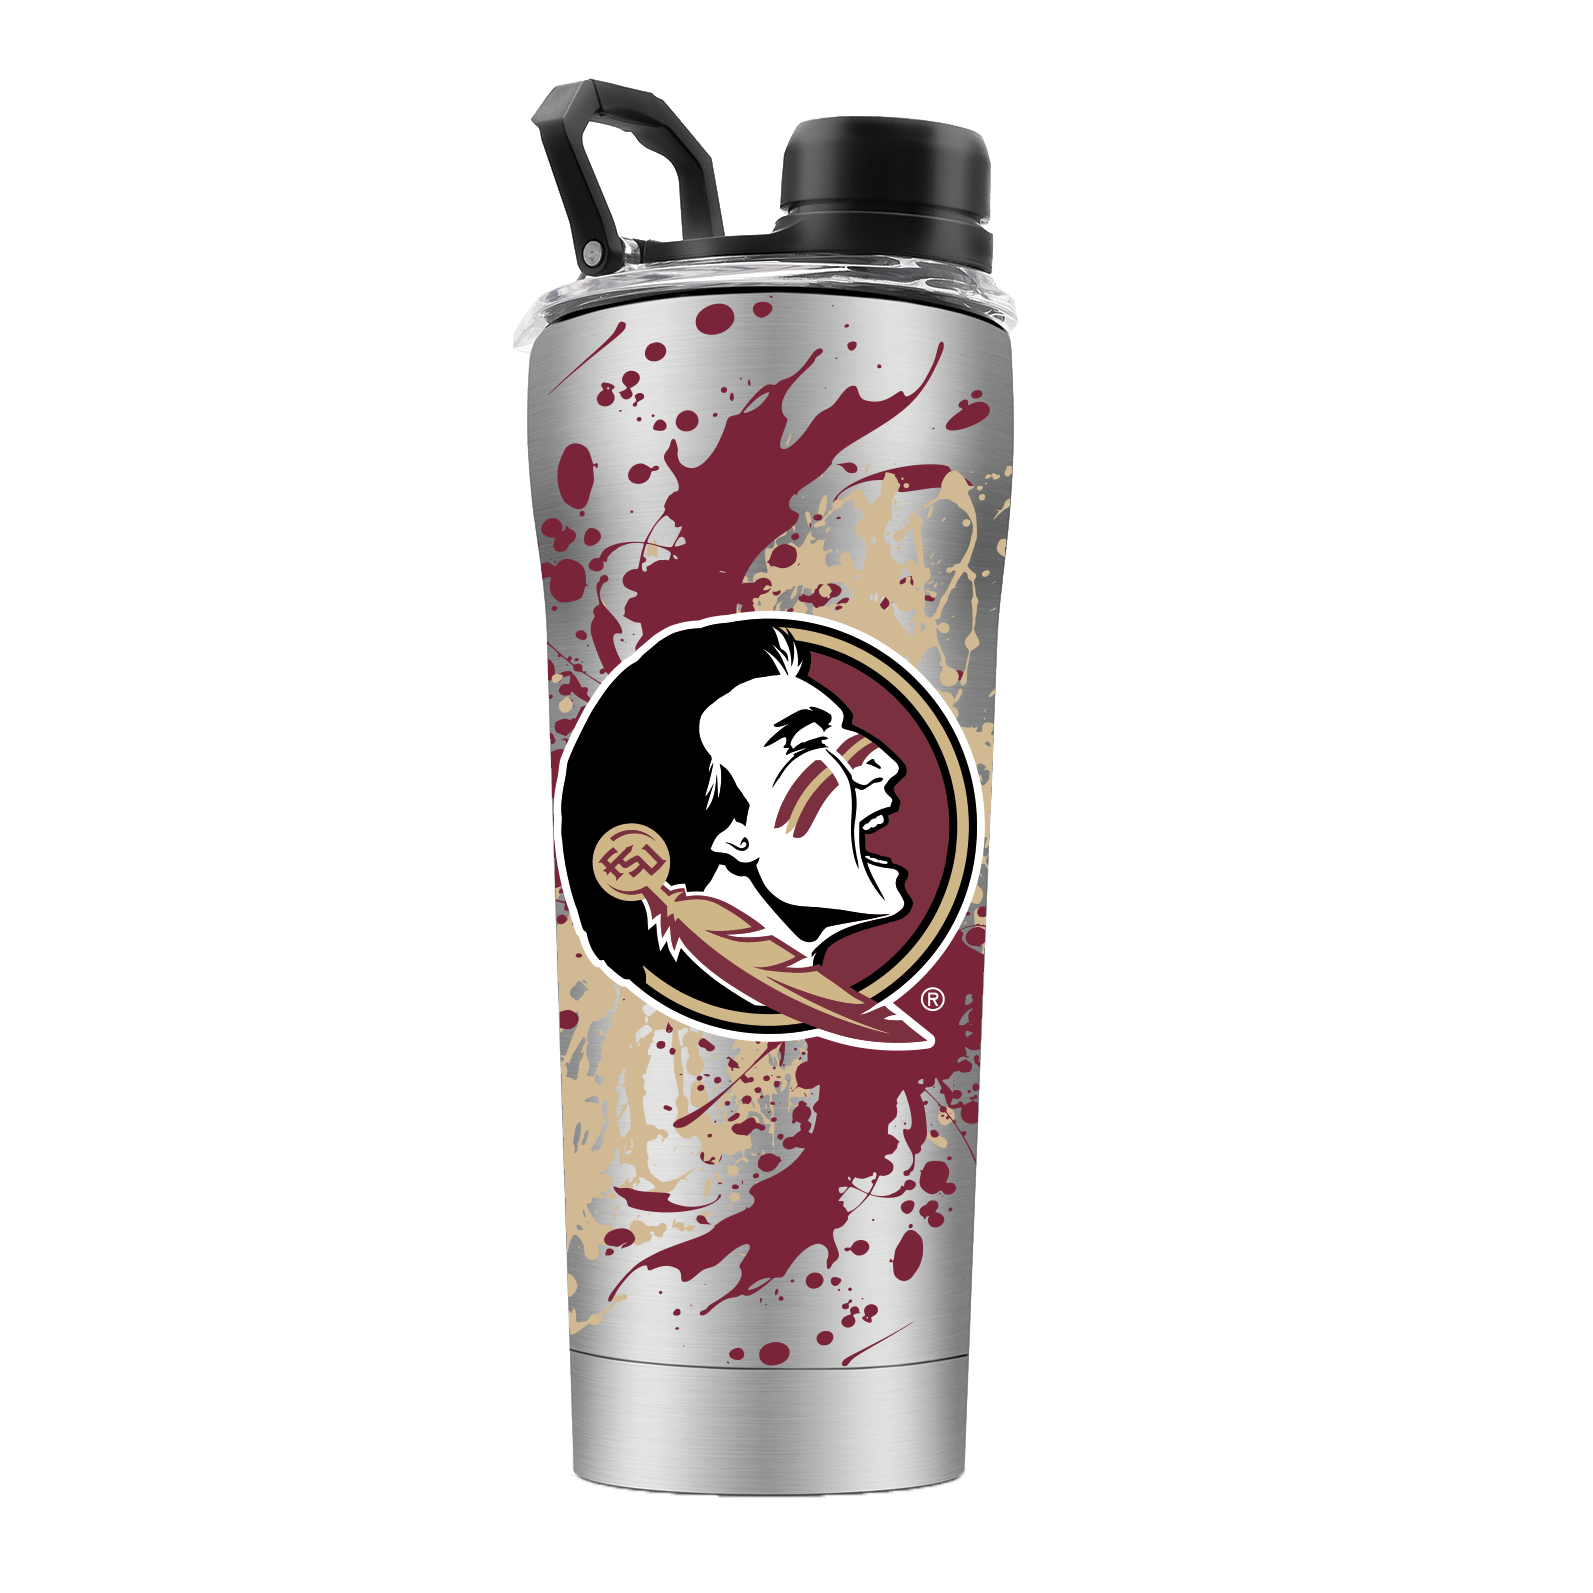 Florida State Stainless Steel Shaker